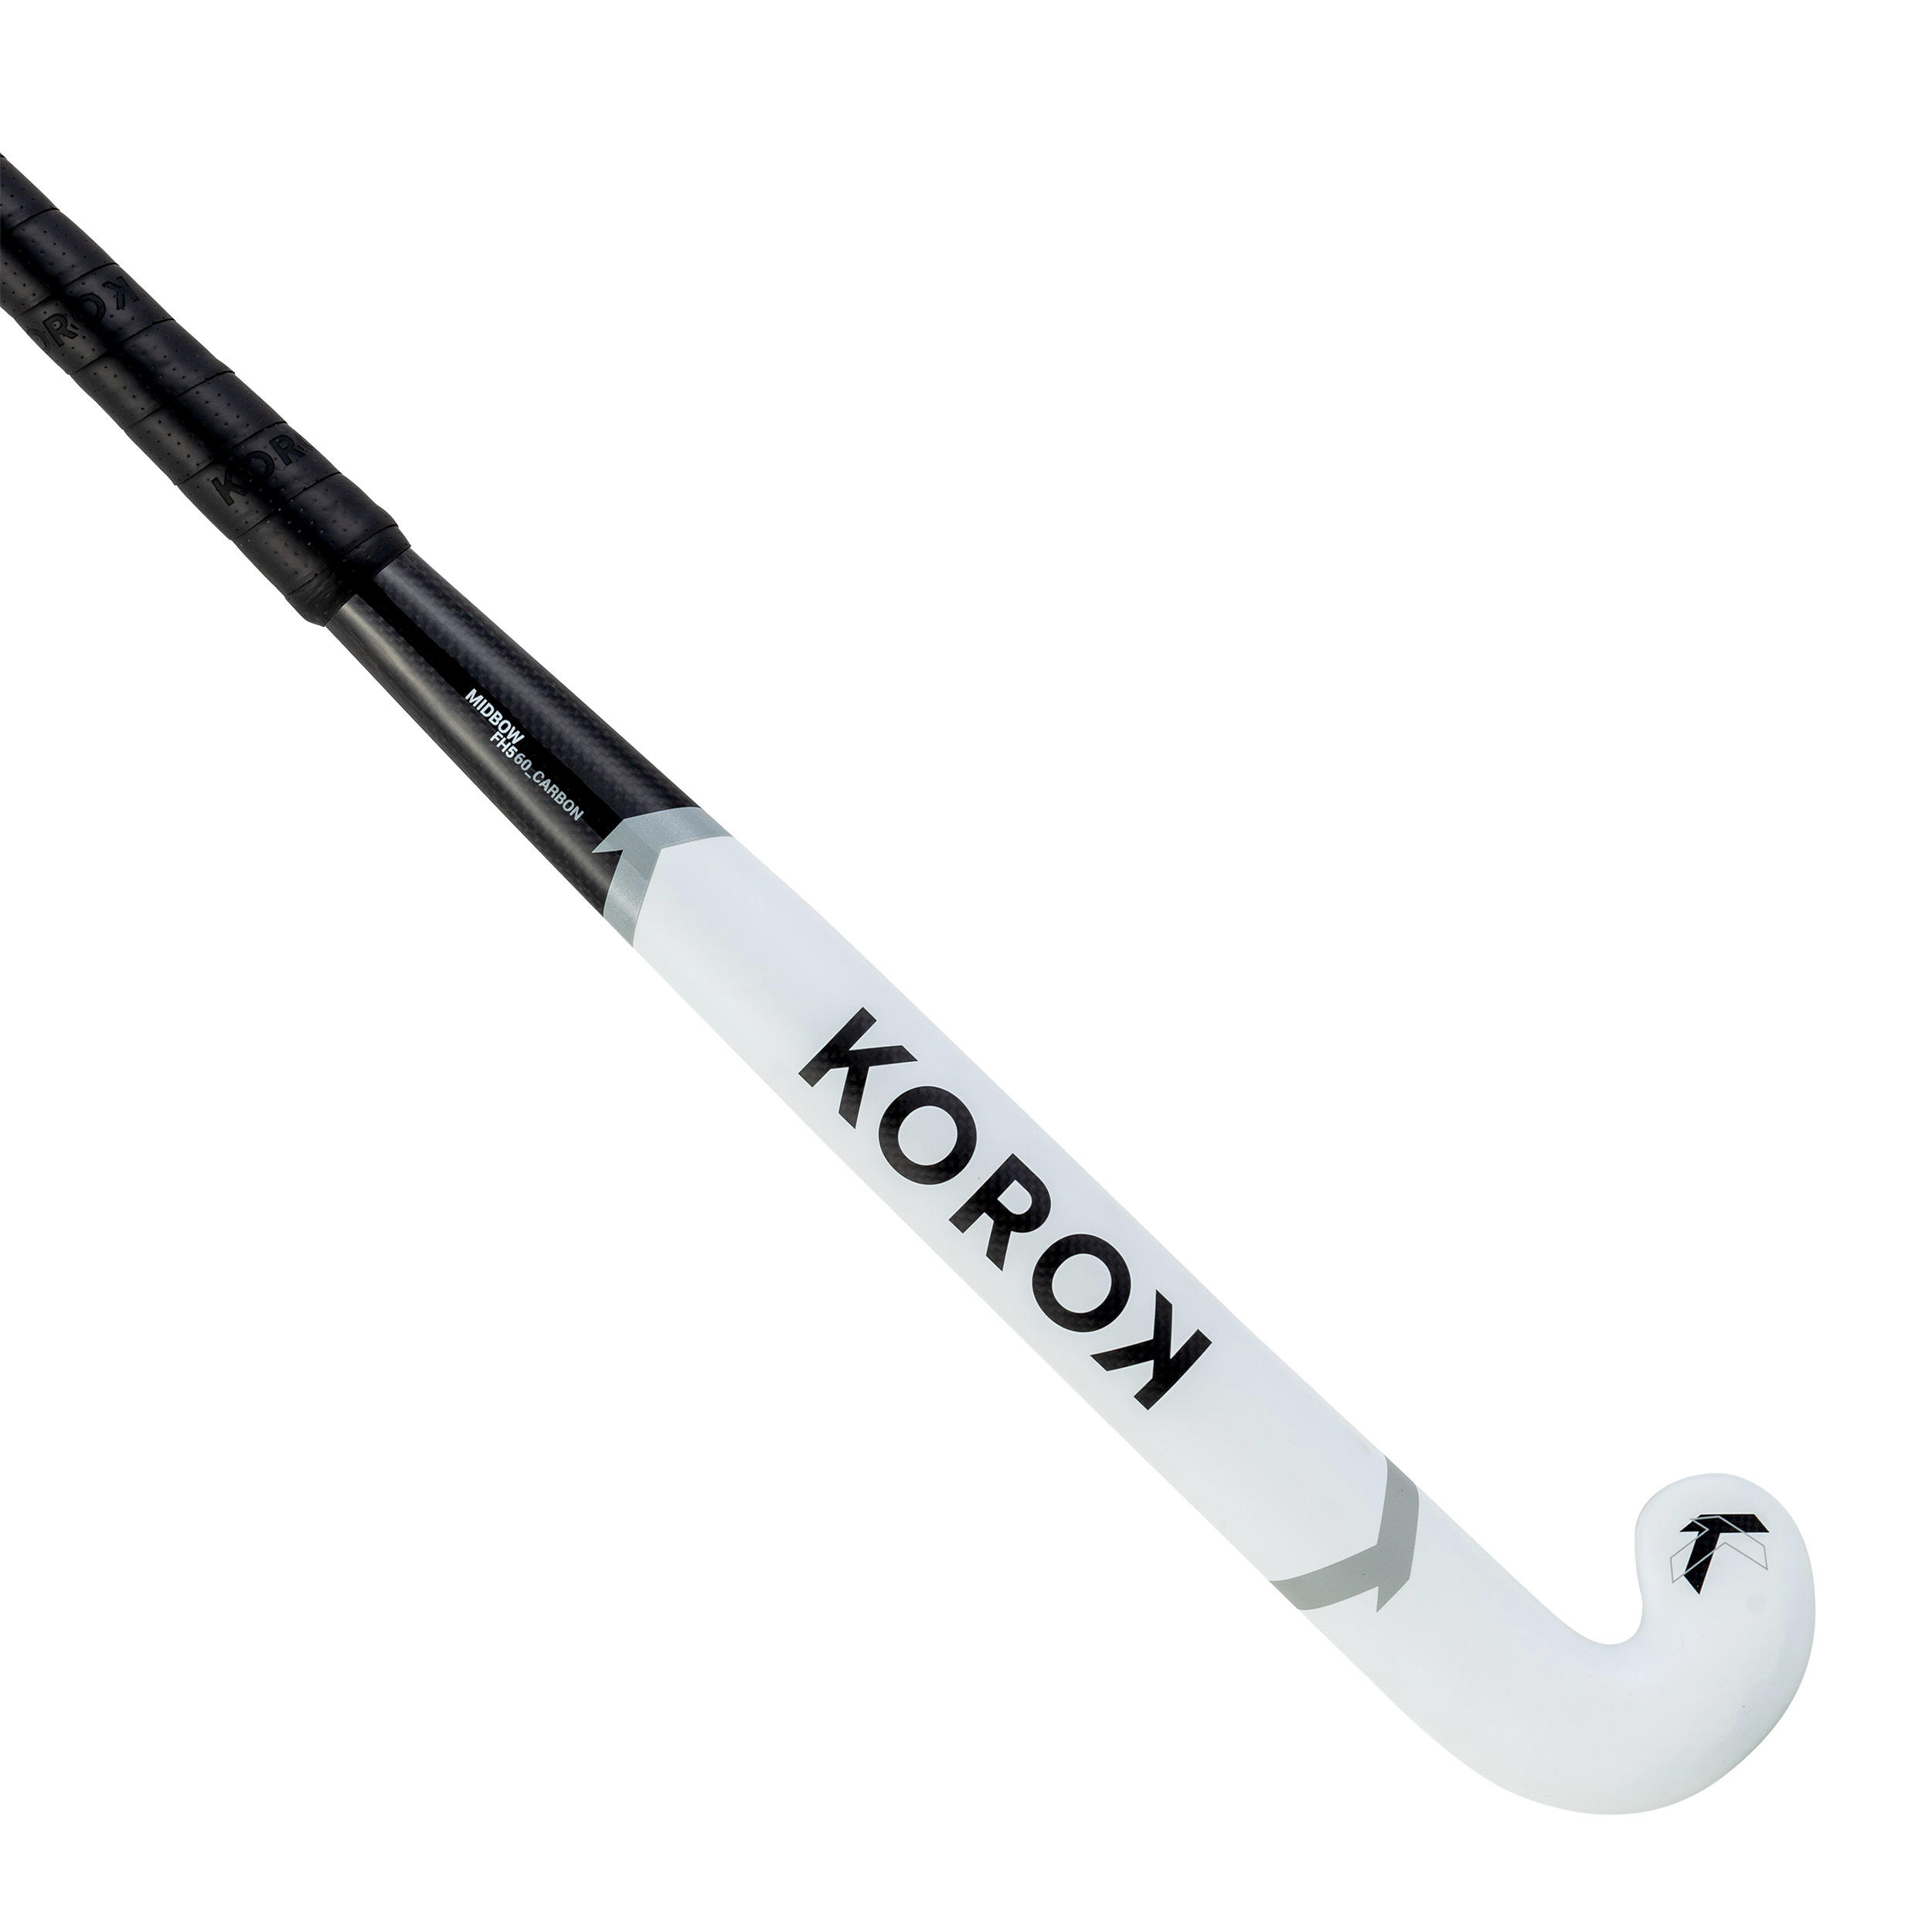 Adult Intermediate 60% Carbon Mid Bow Field Hockey Stick FH560 - White/Grey 1/12